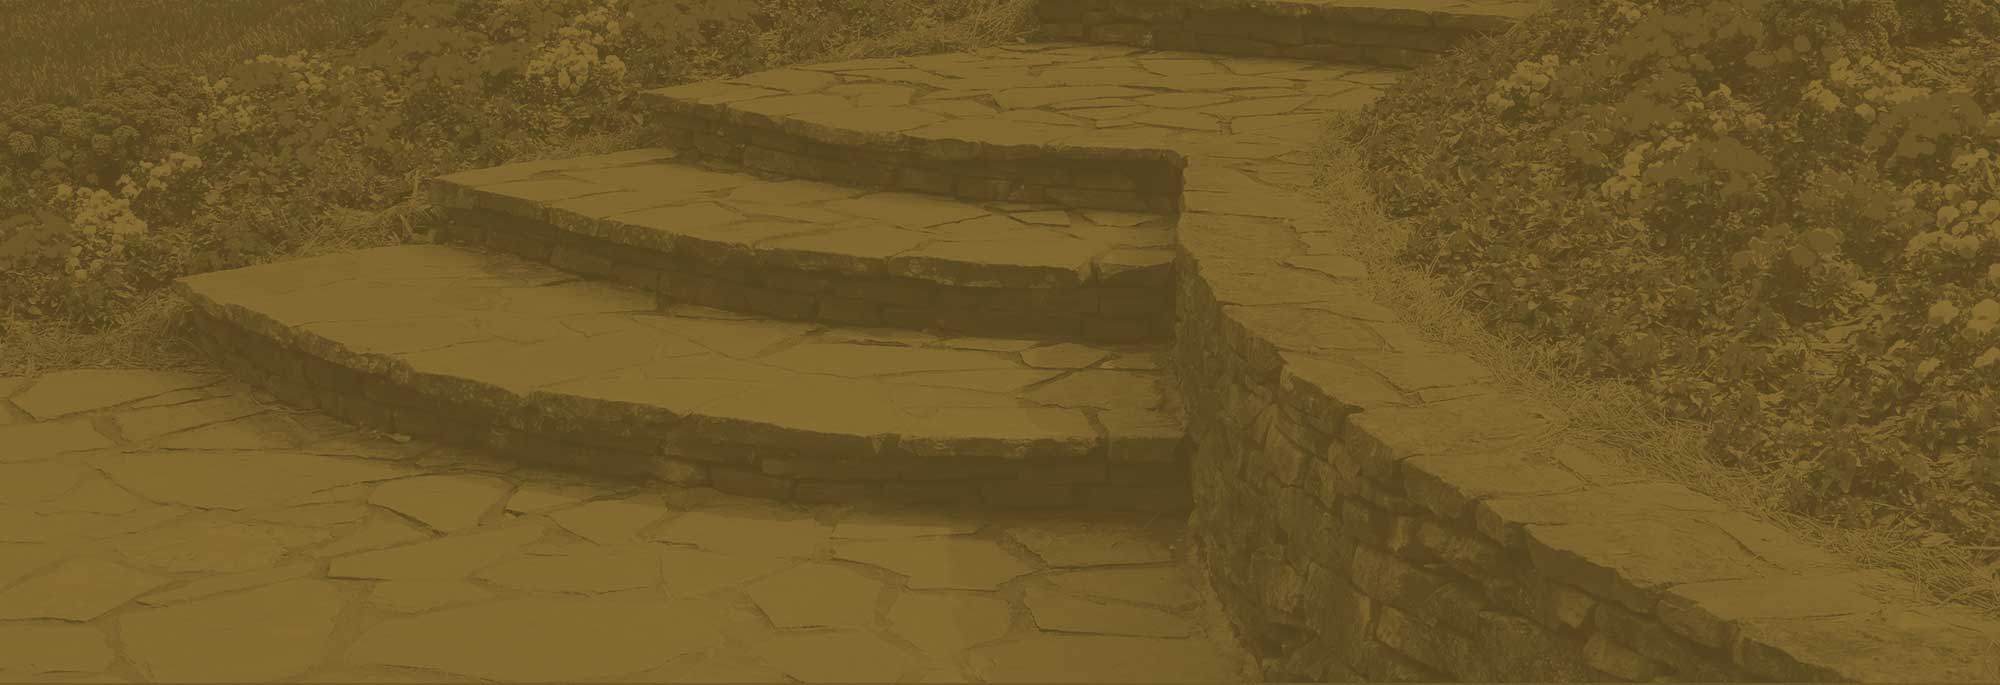 Brown-tinted stone steps.